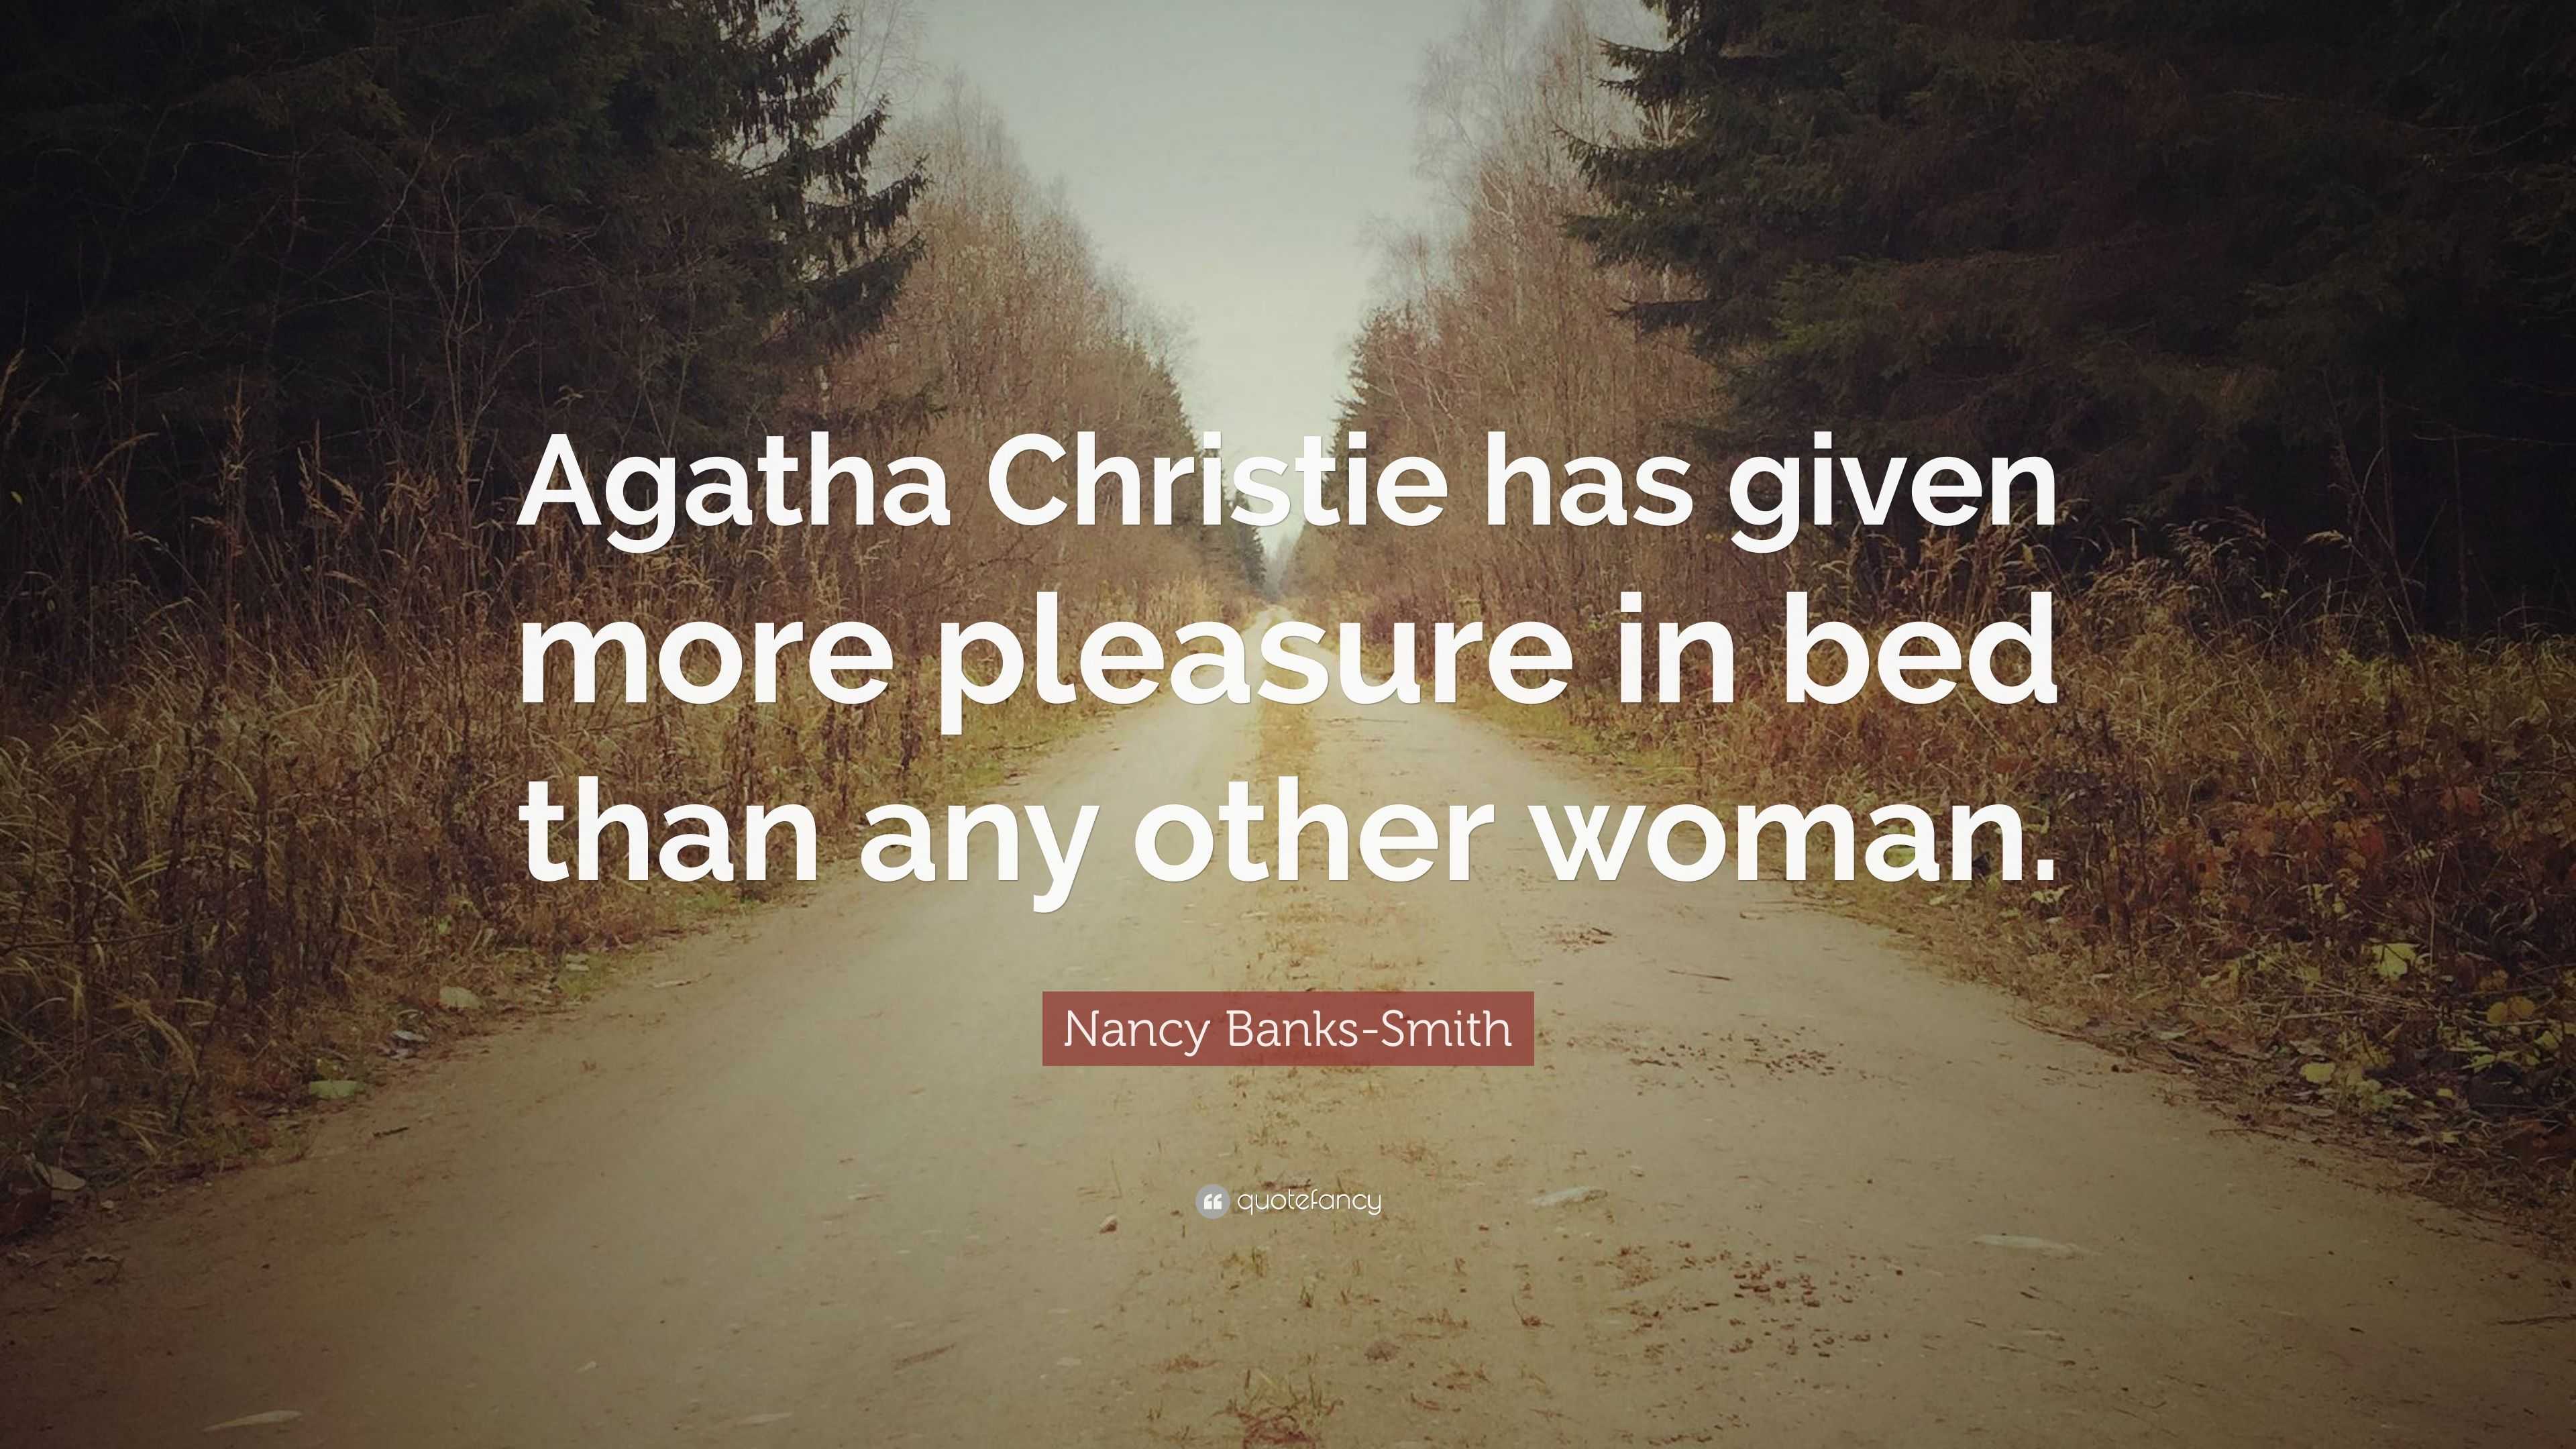 Nancy Banks Smith Quote “agatha Christie Has Given More Pleasure In Bed Than Any Other Woman” 2348